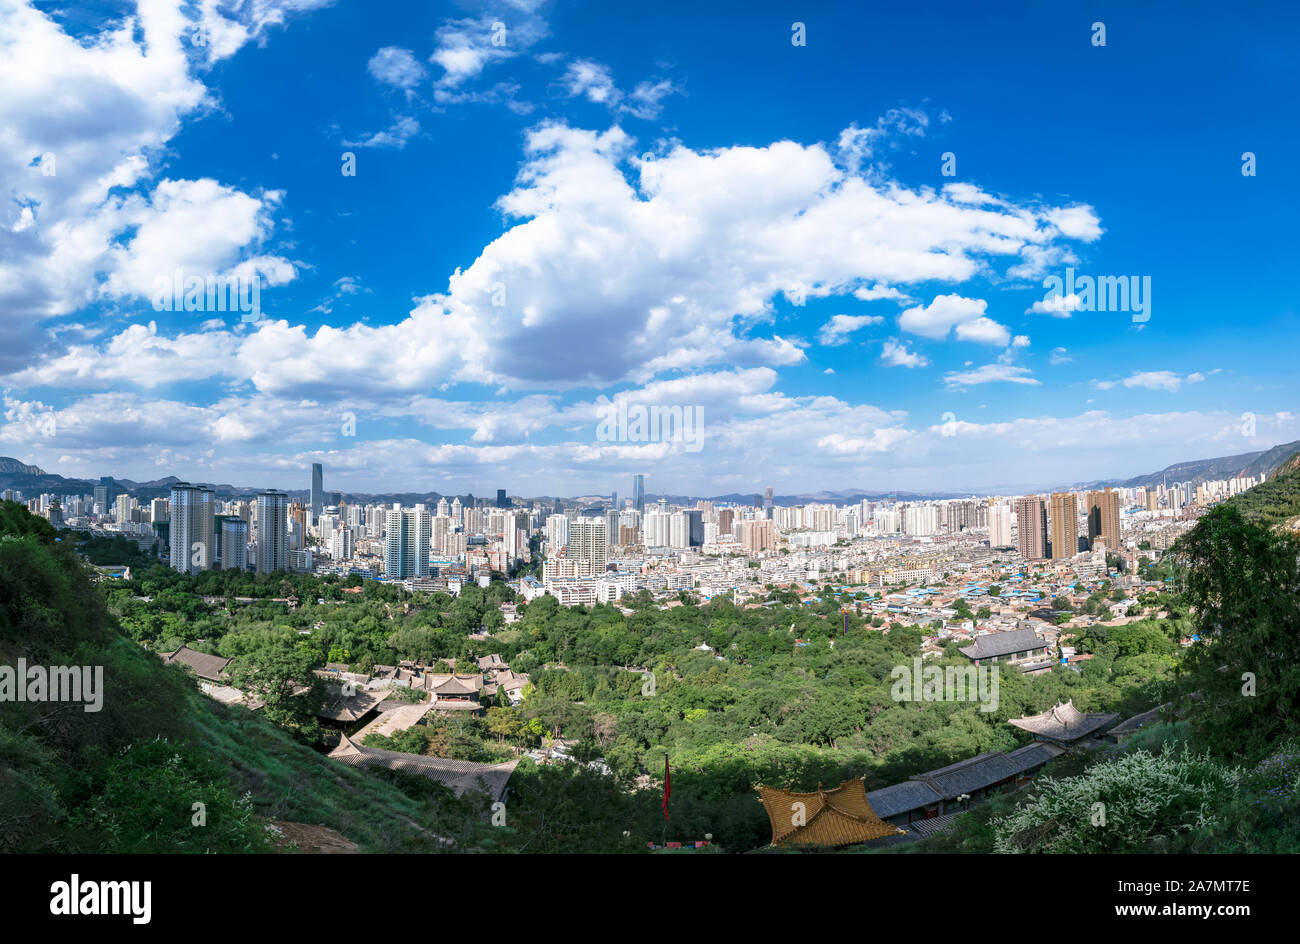 Views of Lanzhou city, a city lies beside the Yellow river and on the Silk Road, in northwest China's Gansu province, 23 September 2019. *** Local Cap Stock Photo